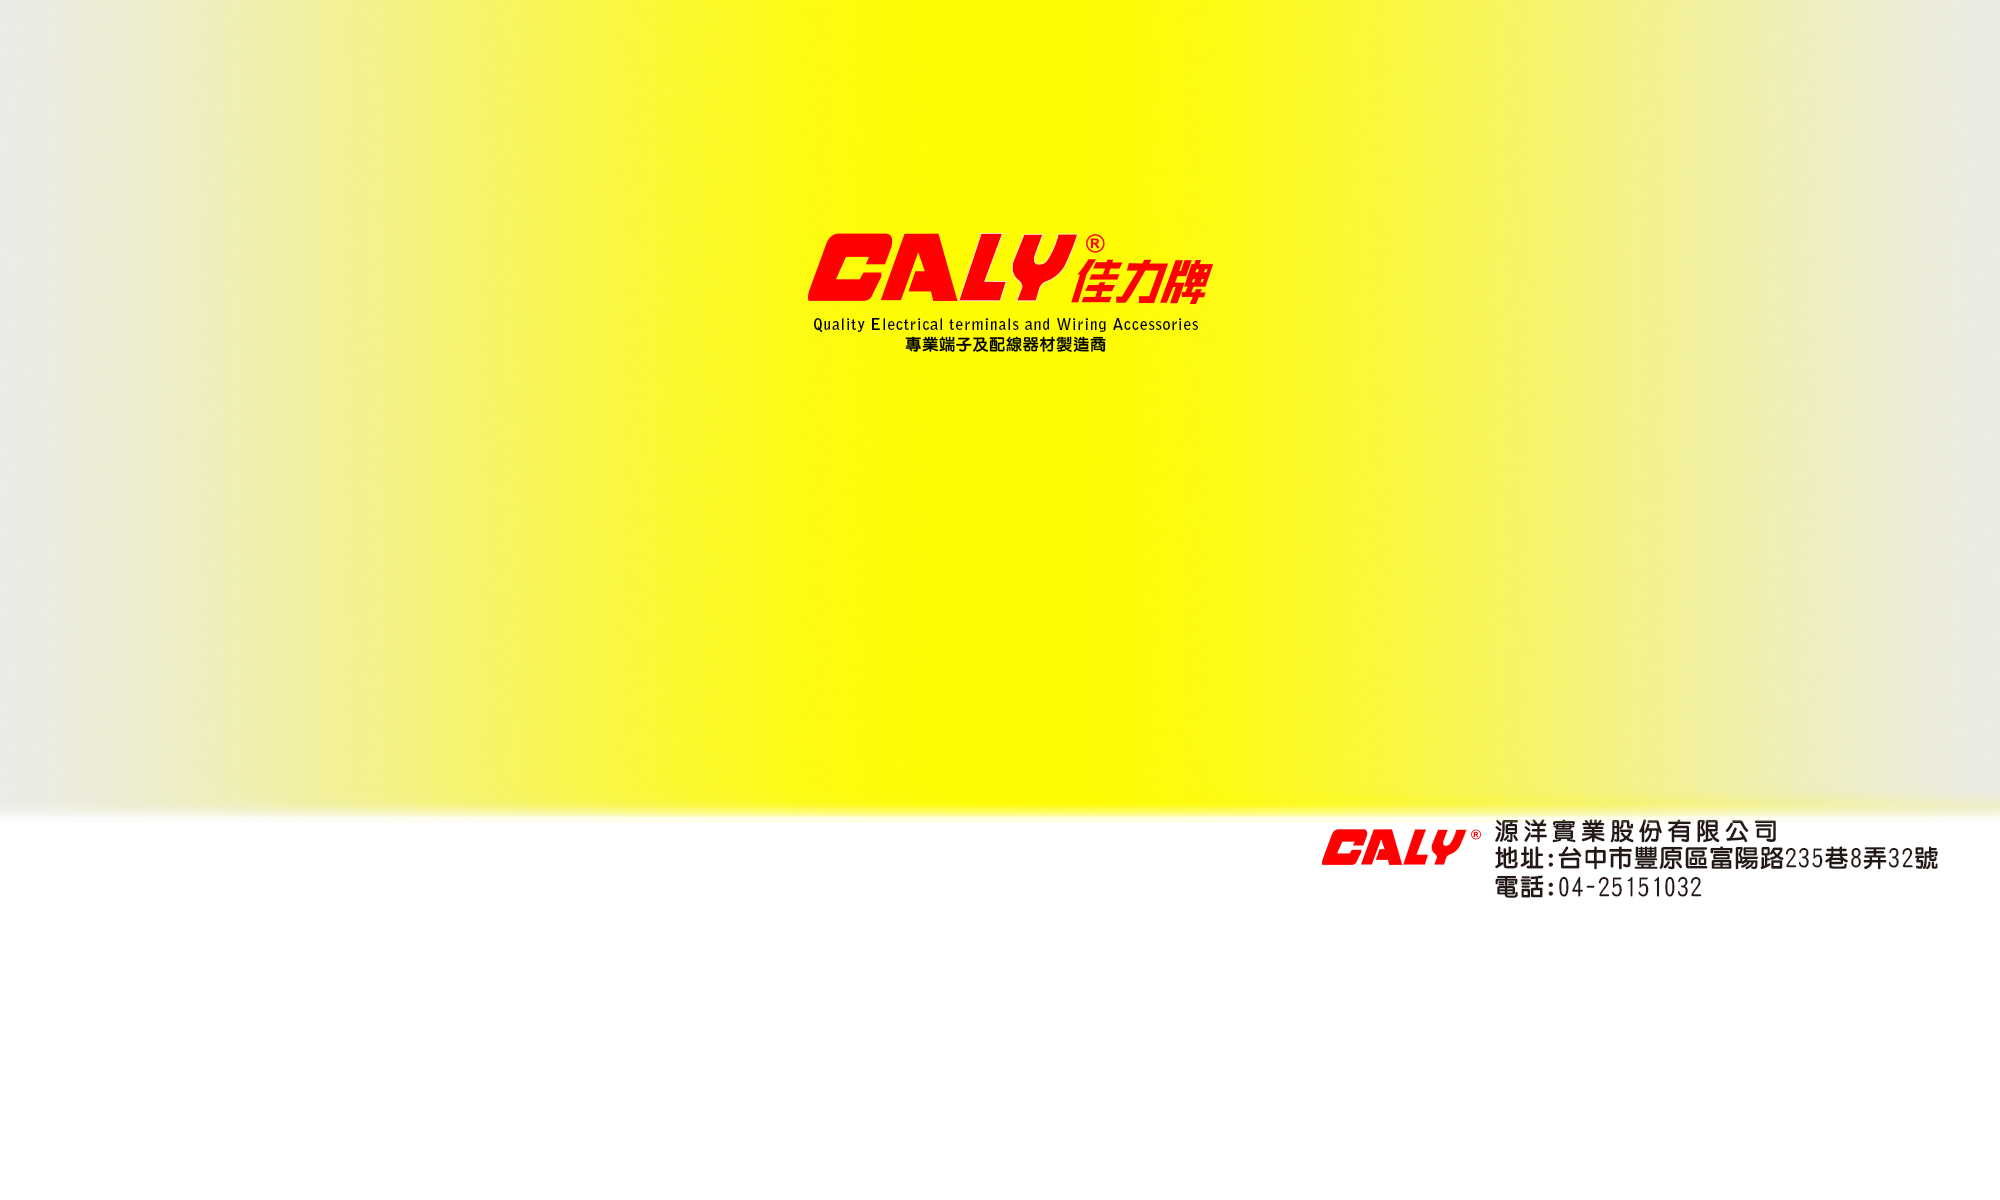 Caly Electrical Terminals 佳力牌